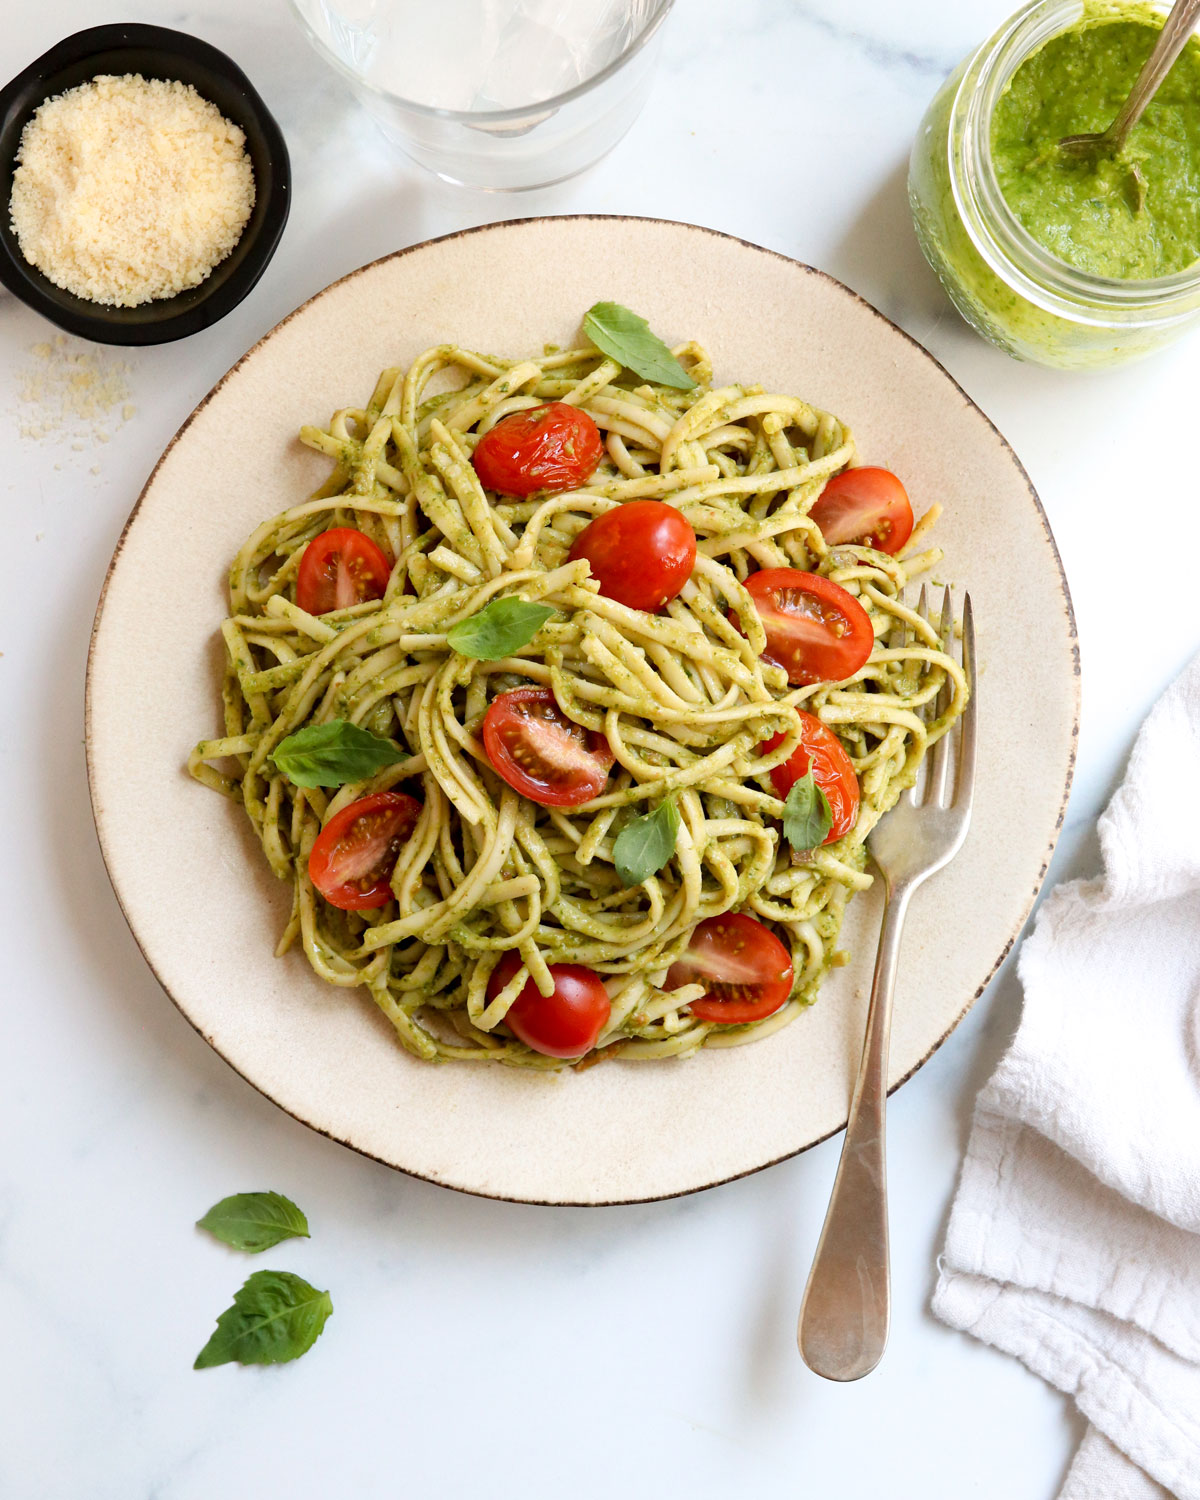 pesto pasta with tomatoes and fresh basil on plate